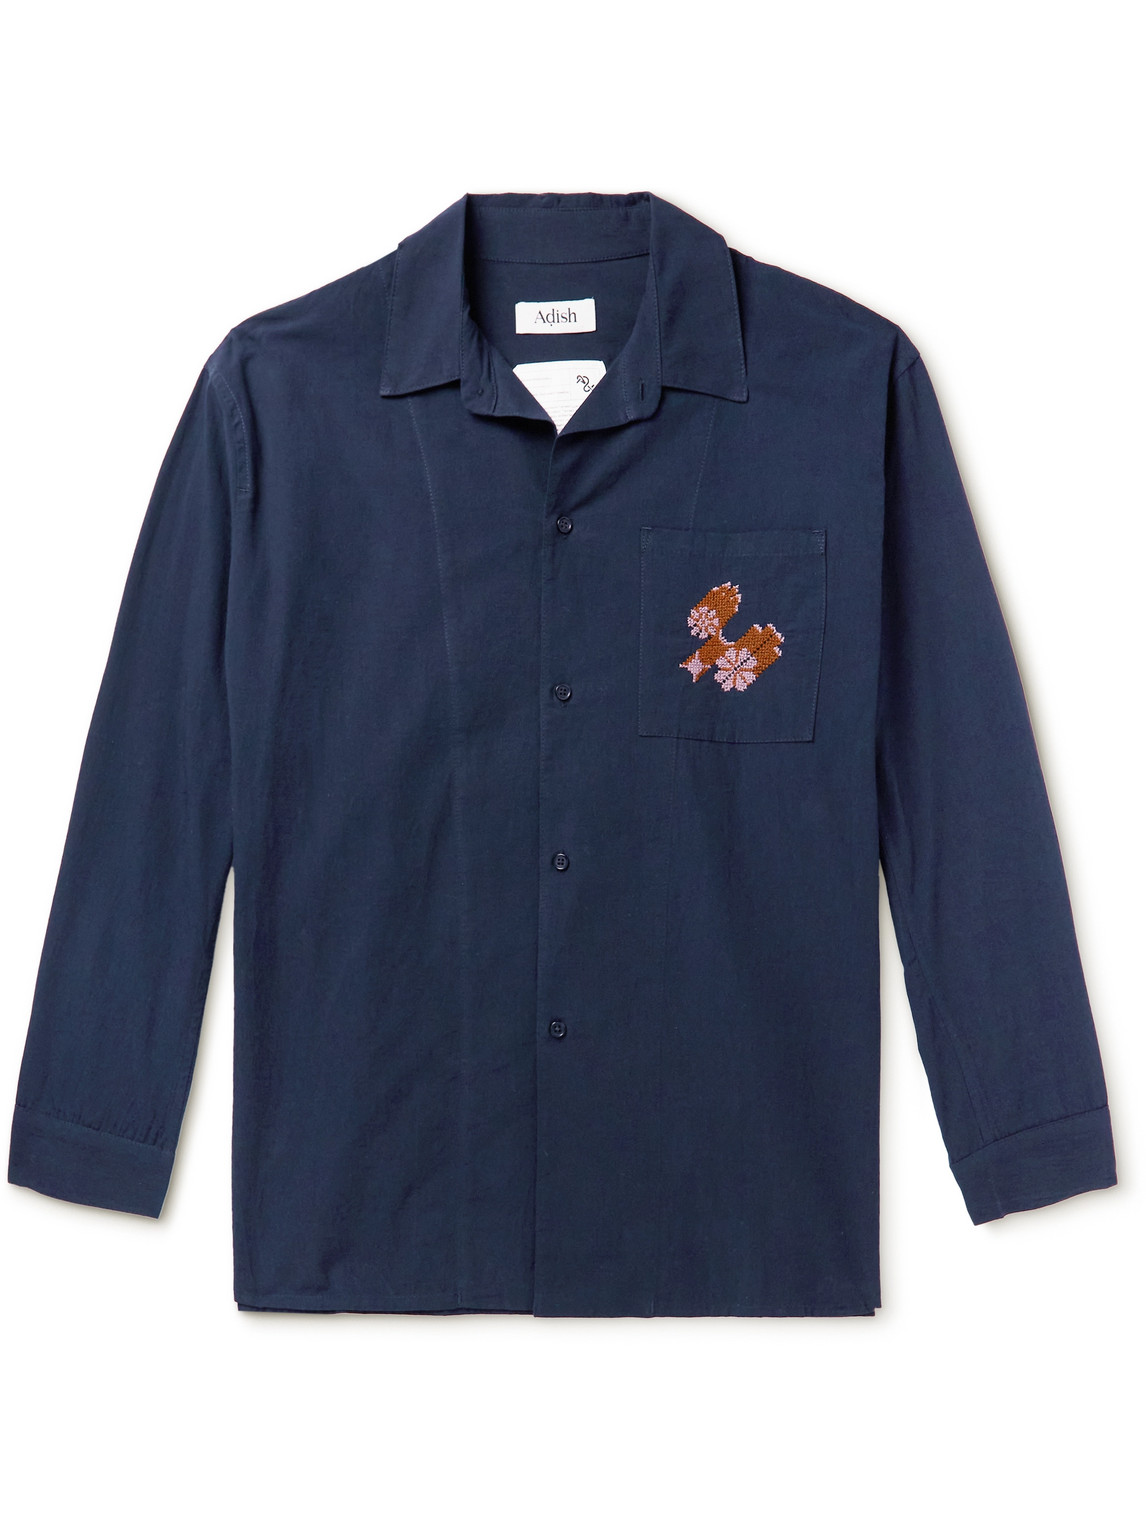 Adish Logo-embroidered Cotton Shirt In Blue